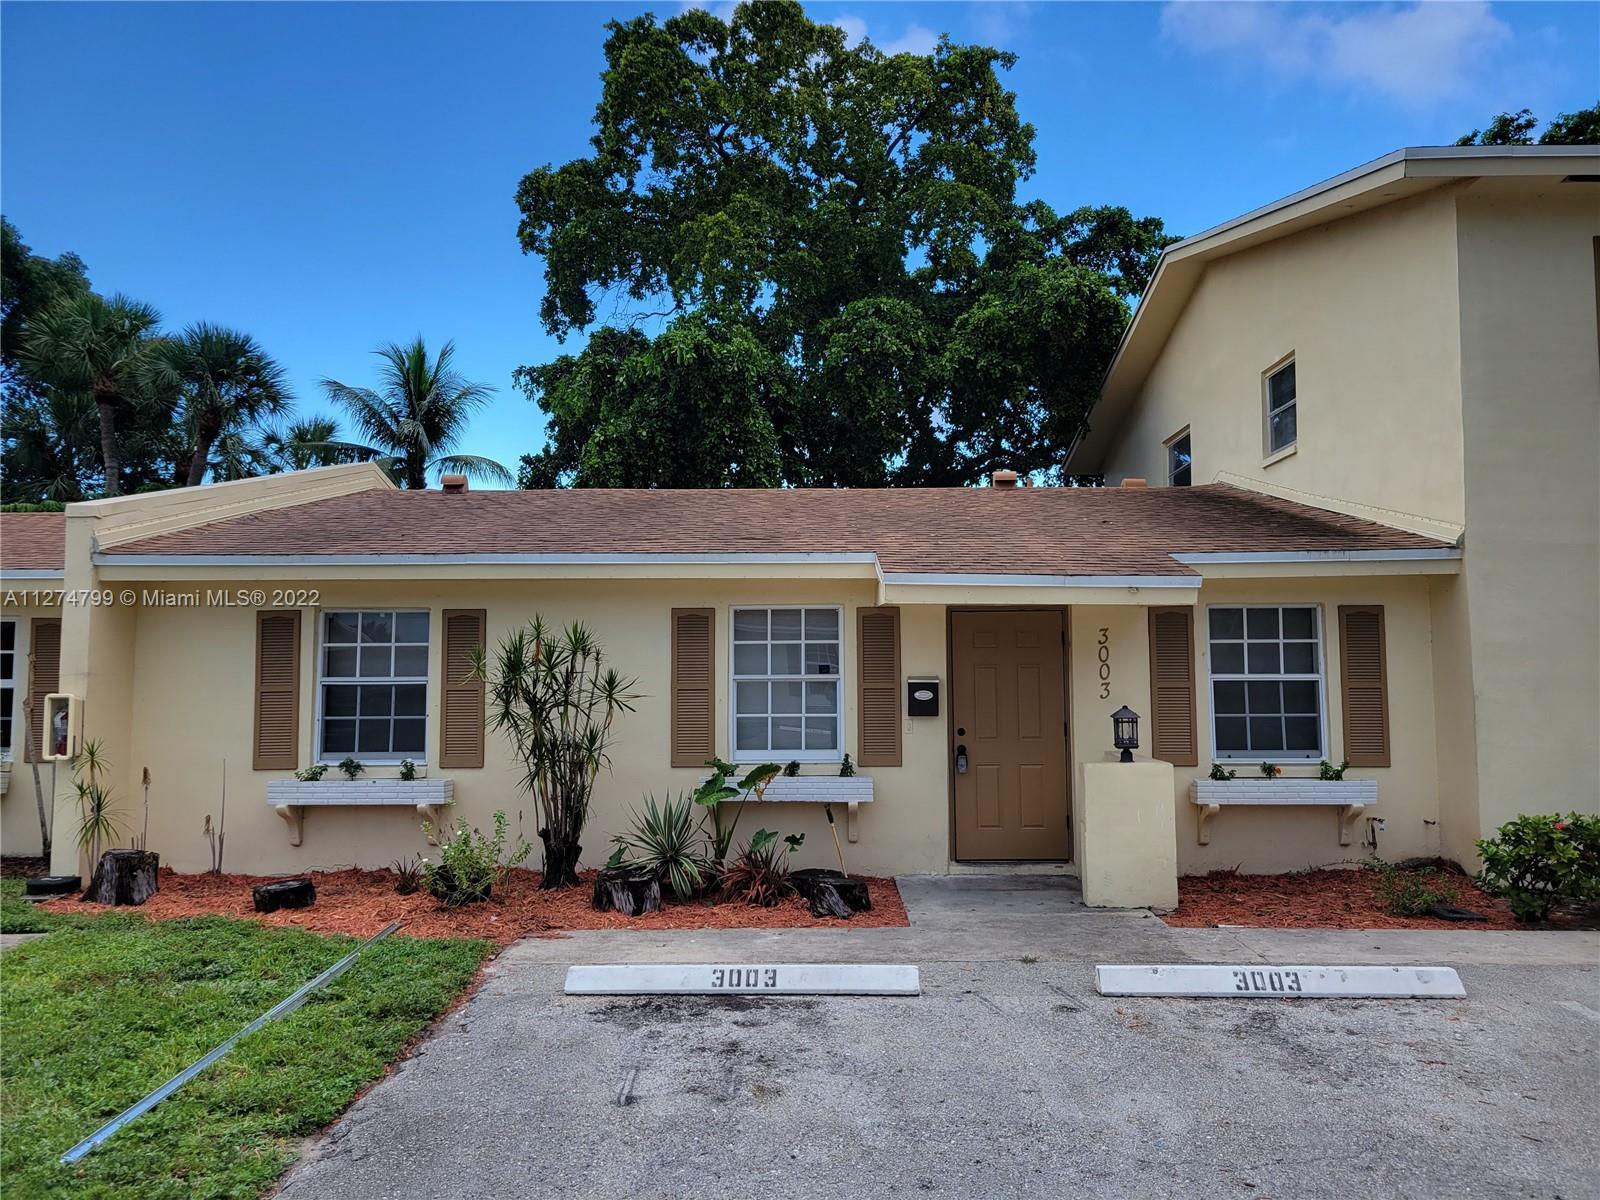 Wow!!! Under 300k for this Fully Renovated 3 bedroom 2 FULL bath townhome in Palm Aire Village with 